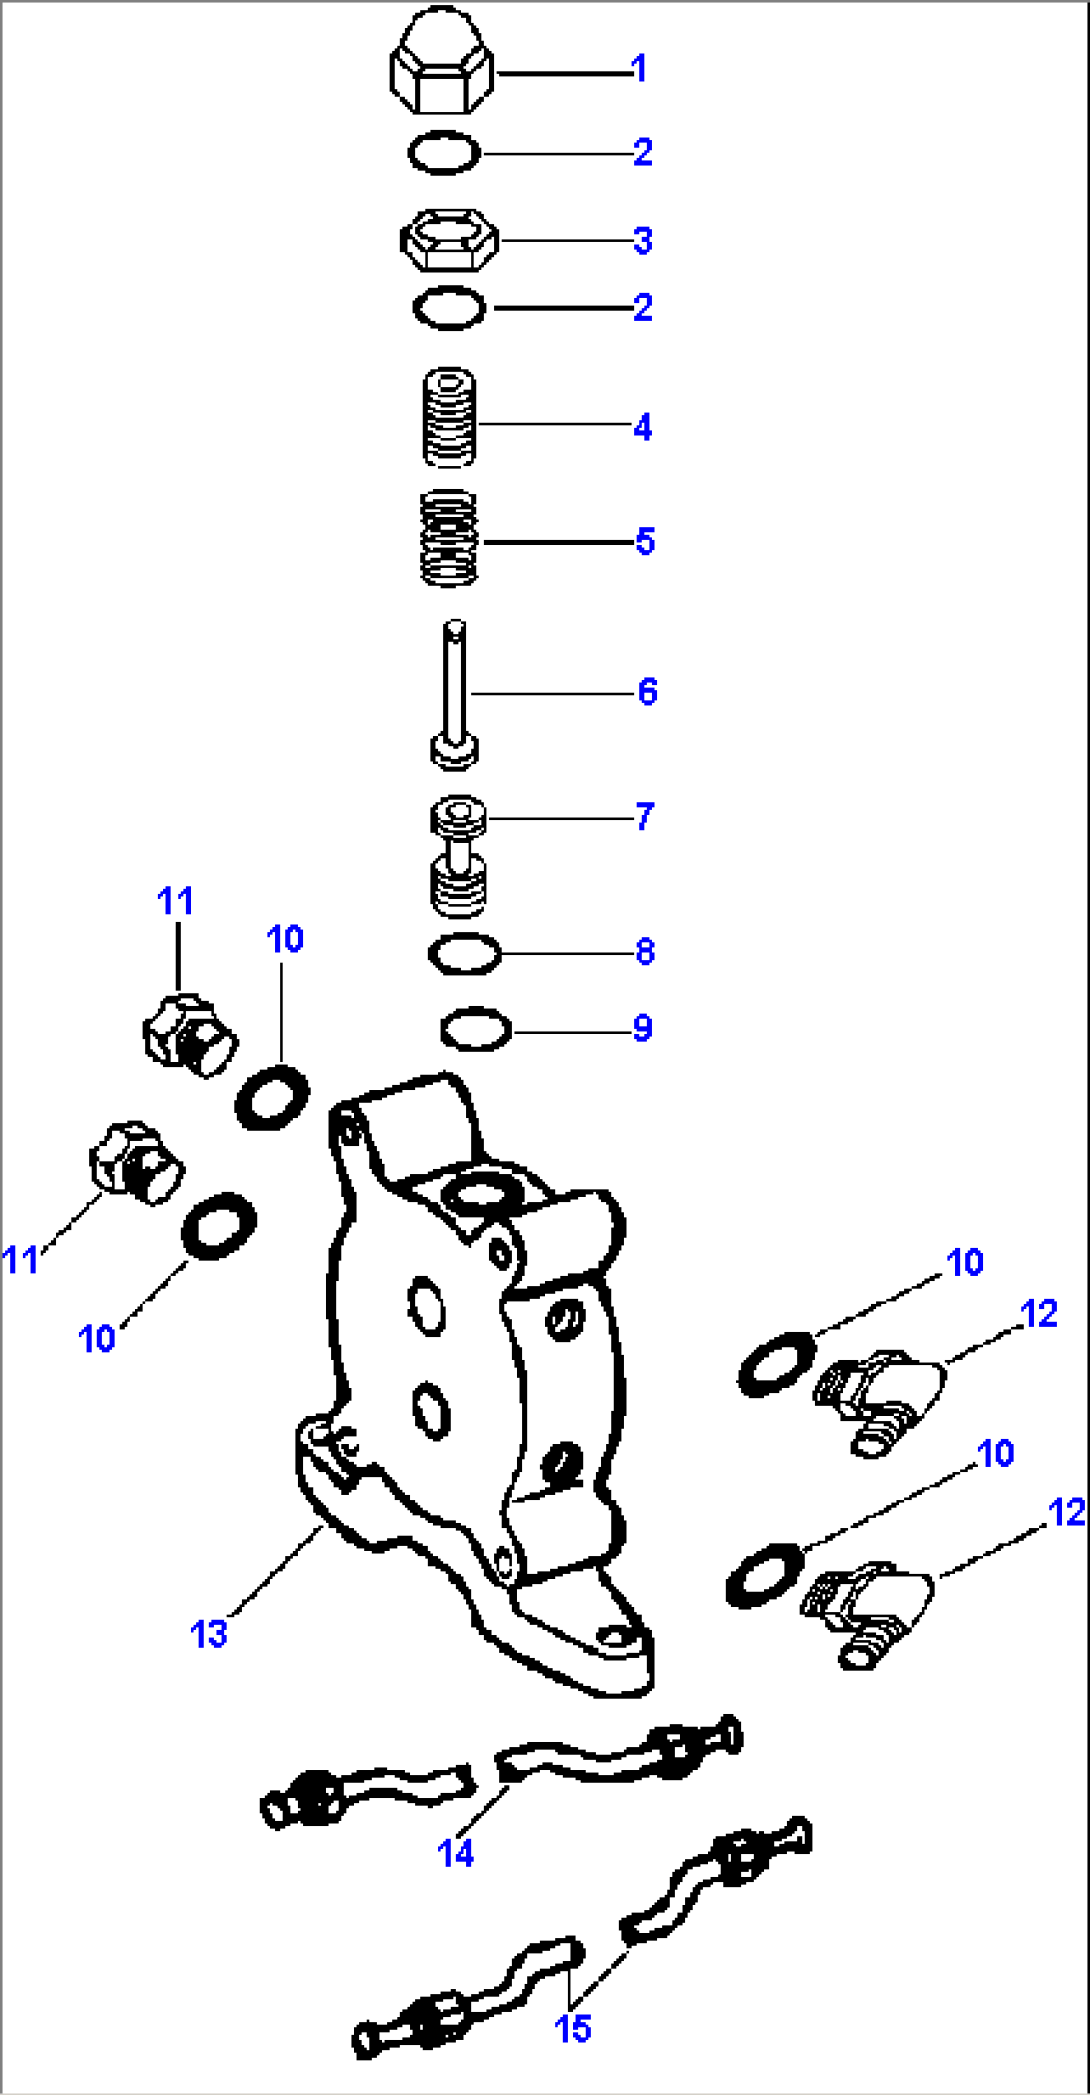 EQUIPMENT CONTROL VALVE END SECTION